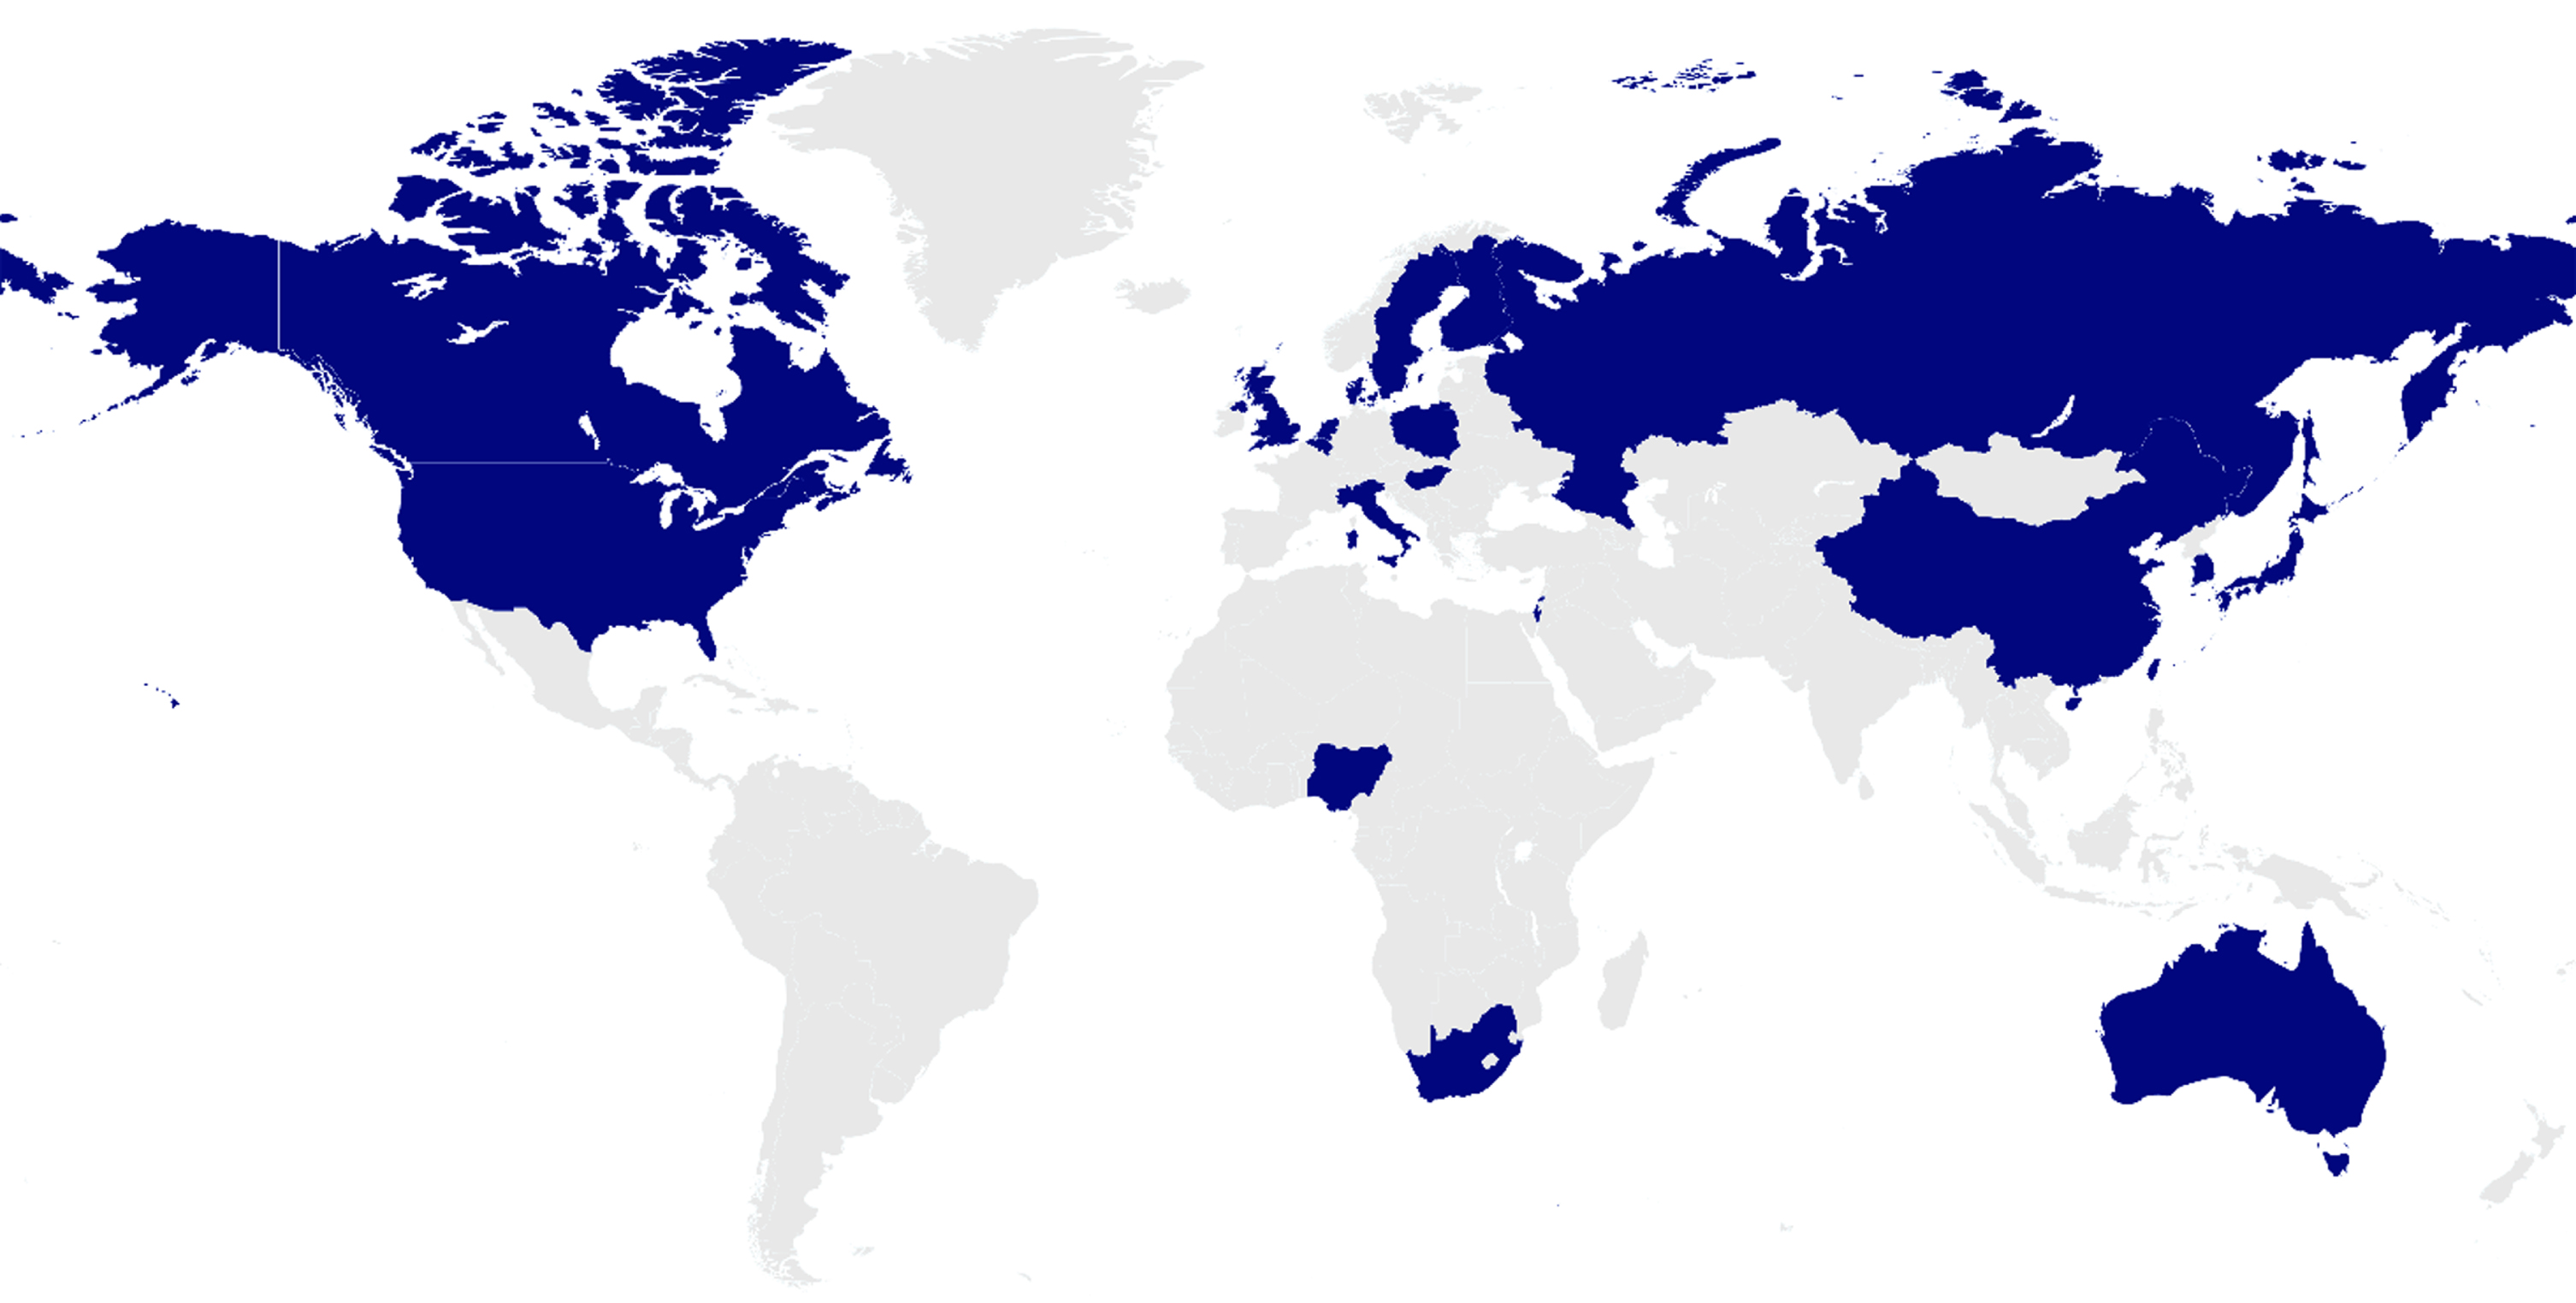 Countries with published studies of sites of groundwater TCE contamination [89].